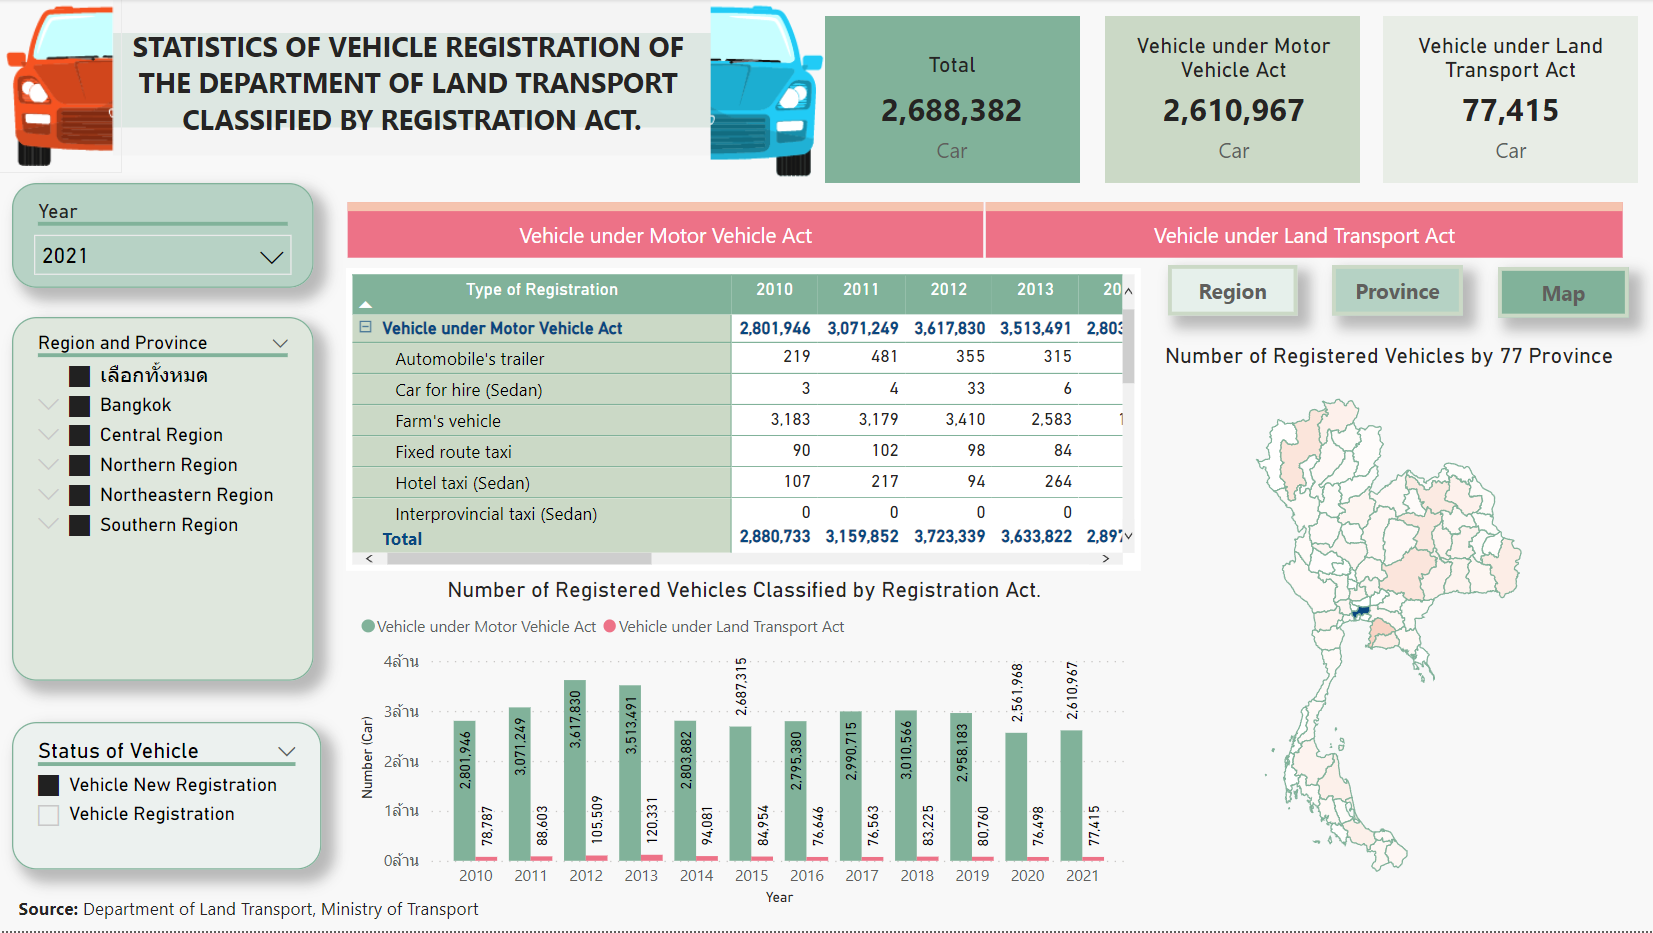 STATISTICS OF VEHICLE REGISTRATION OF THE DEPARTMENT OF LAND TRANSPORT CLASSIFIED BY REGISTRATION ACT